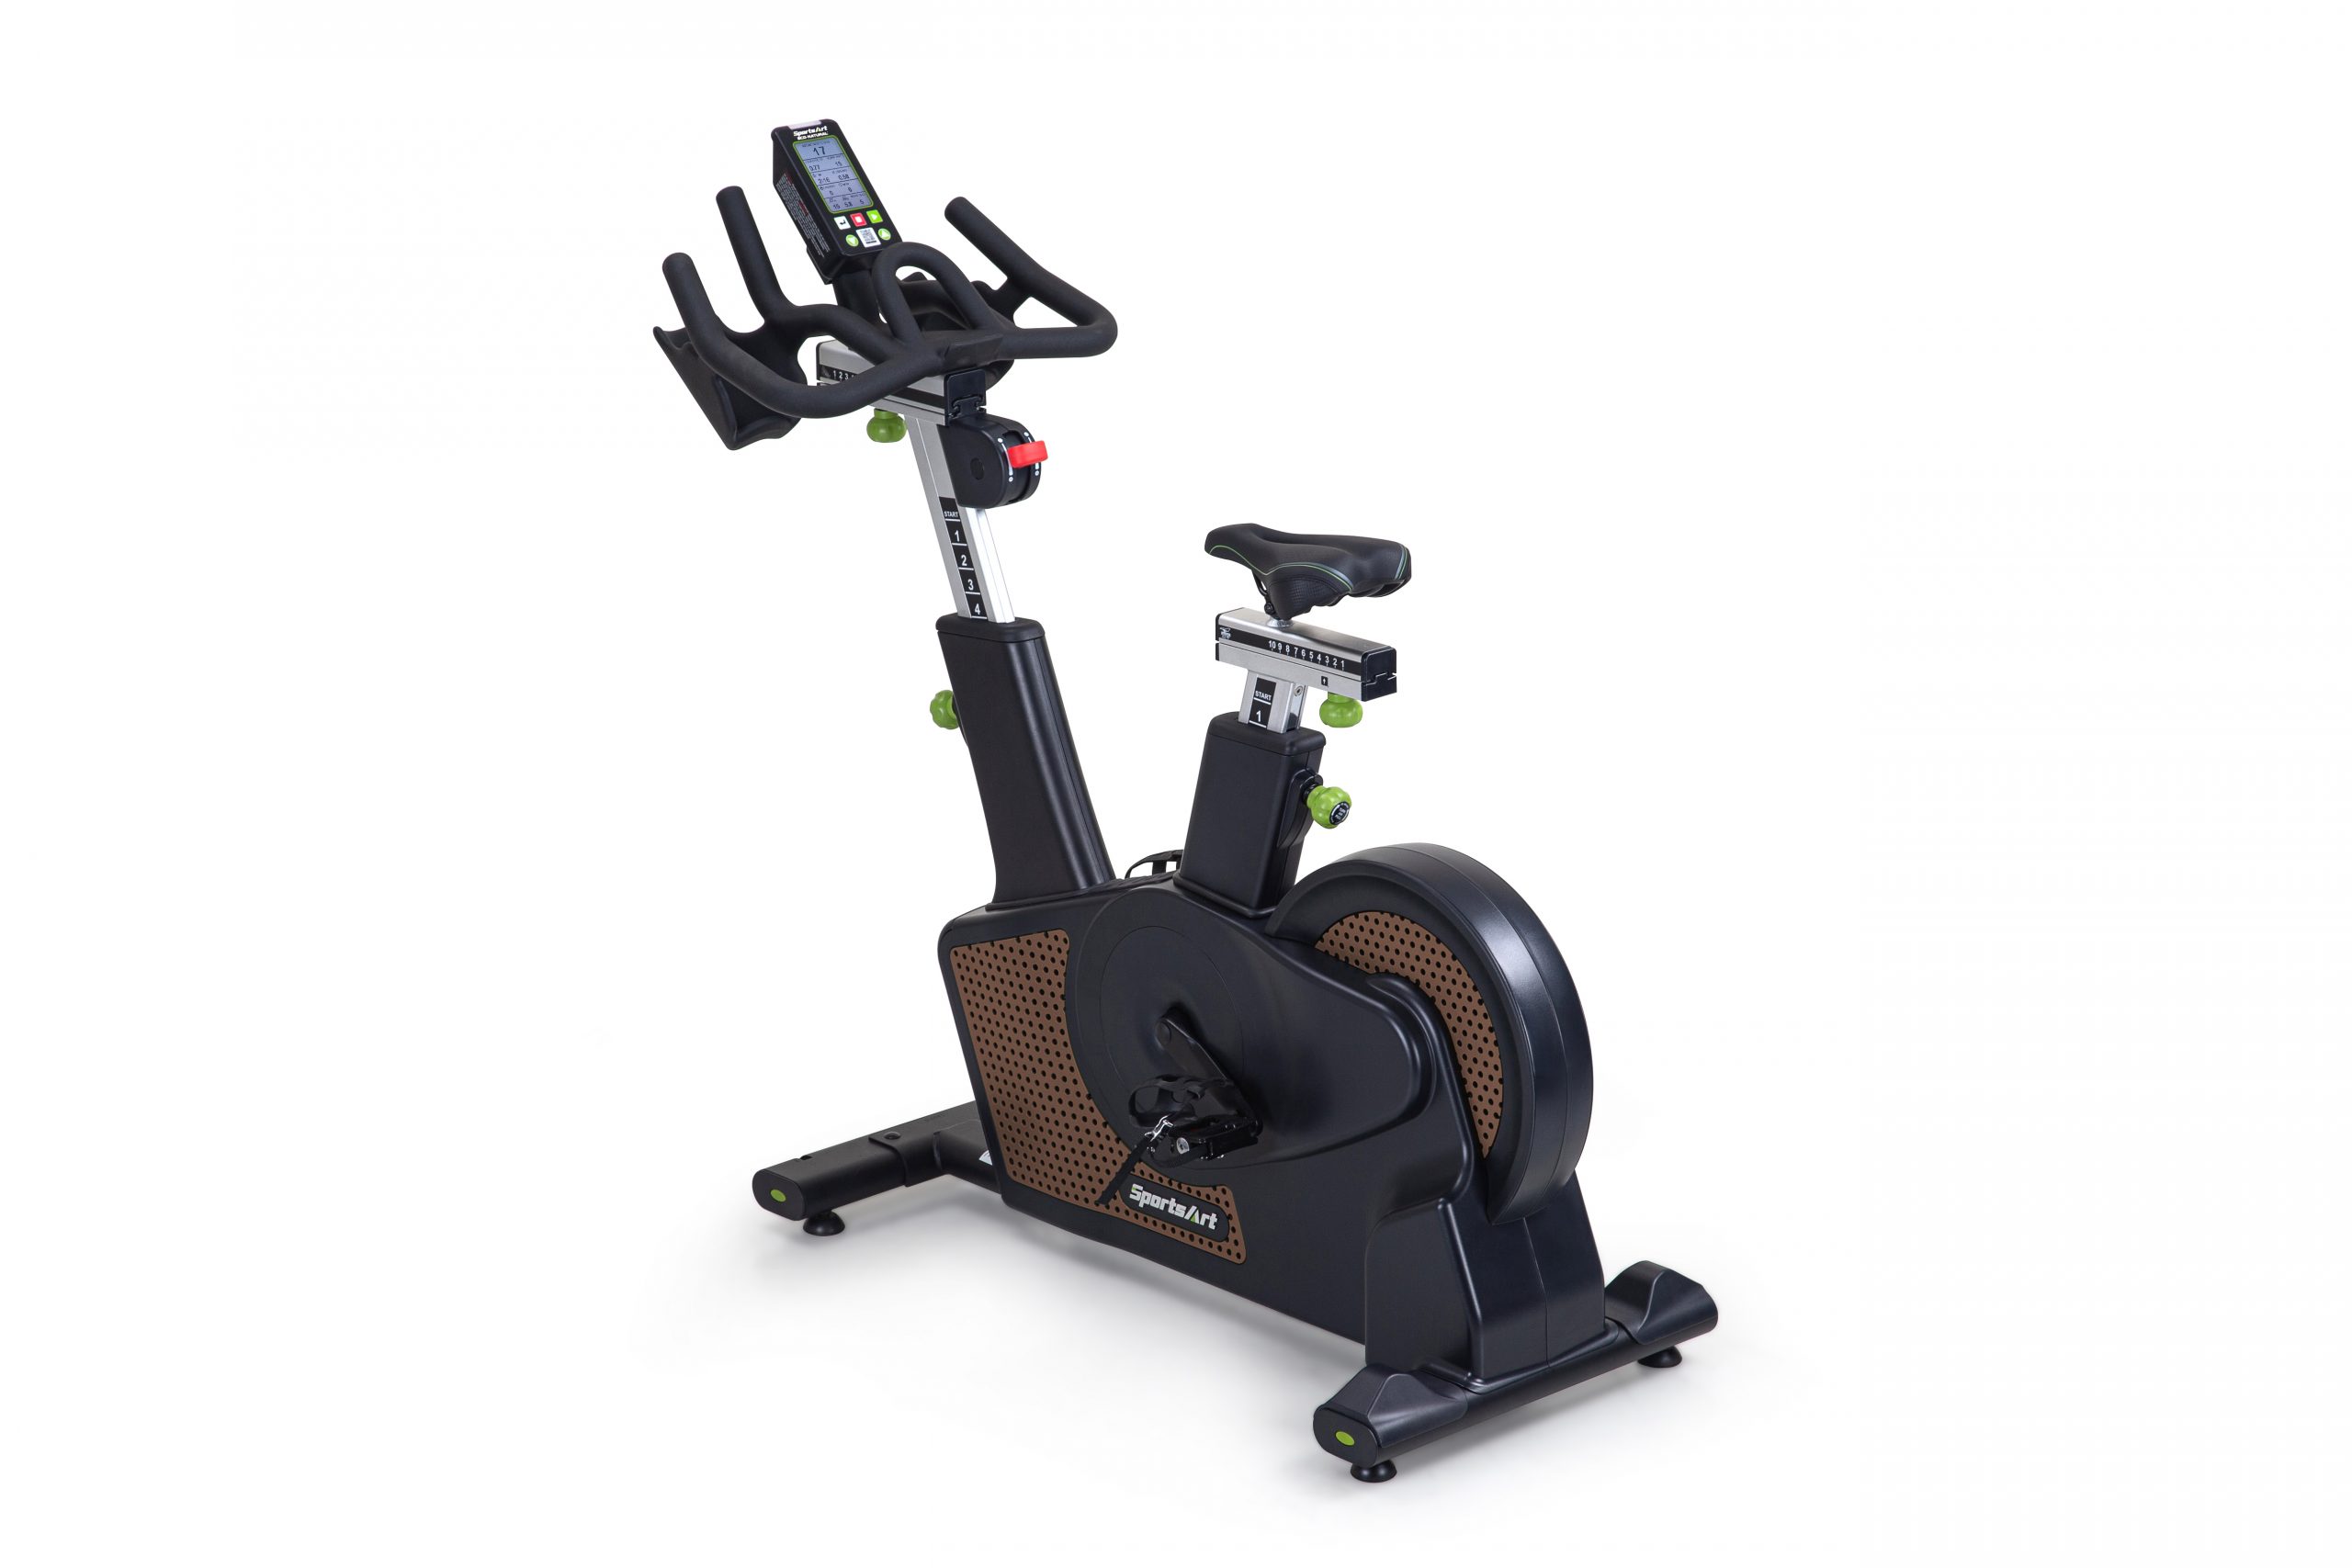 SportsArt Vatio Status Eco-Natural Cycle C516 side view angle with the console toward the left hand side